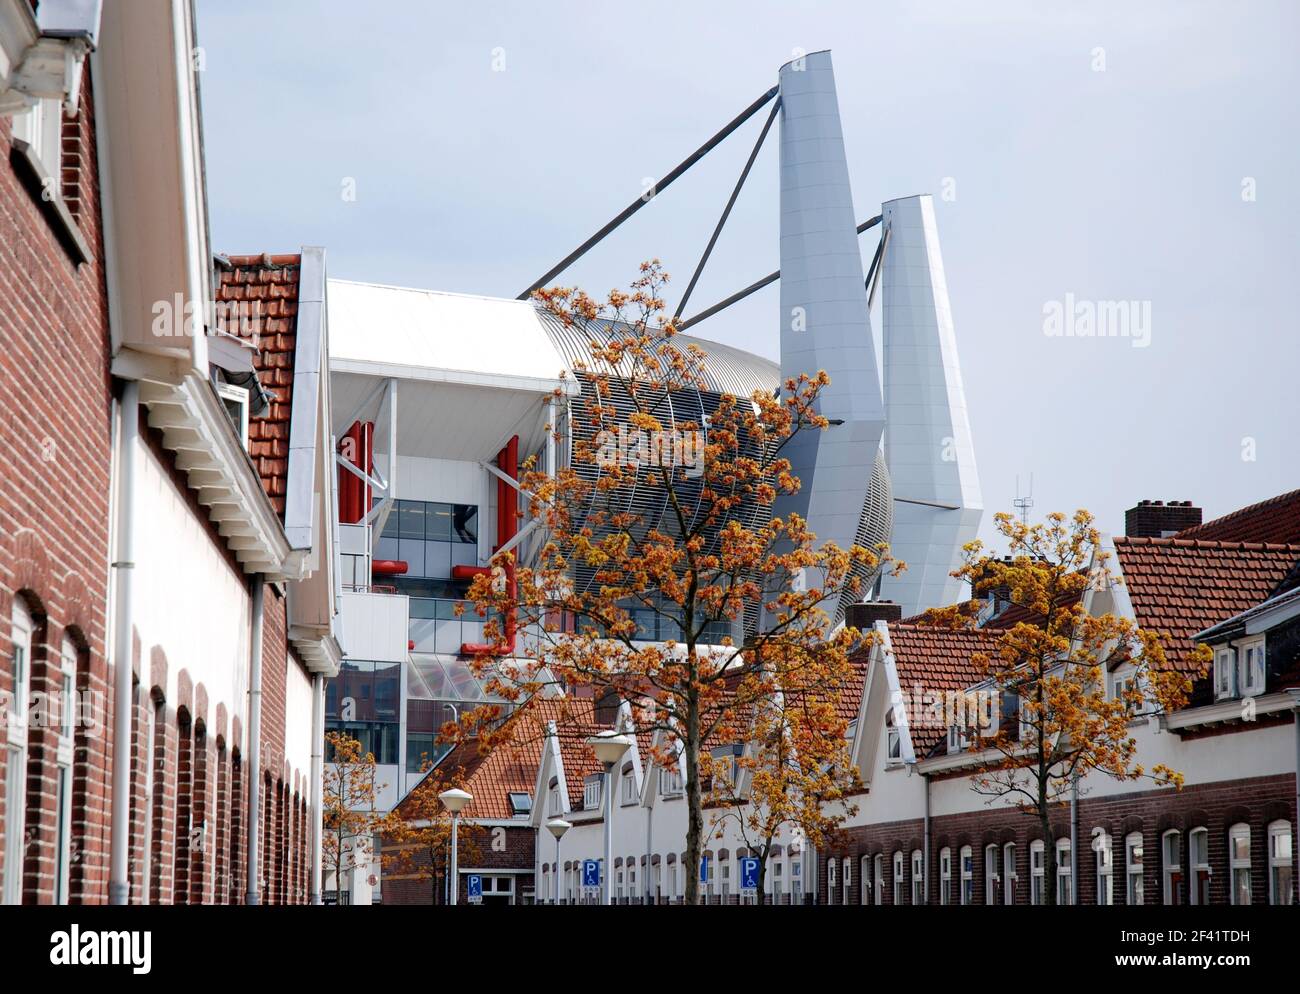 Eindhoven, Netherlands 04-11-2009 architecture of traditional houses and the Philips stadium Stock Photo